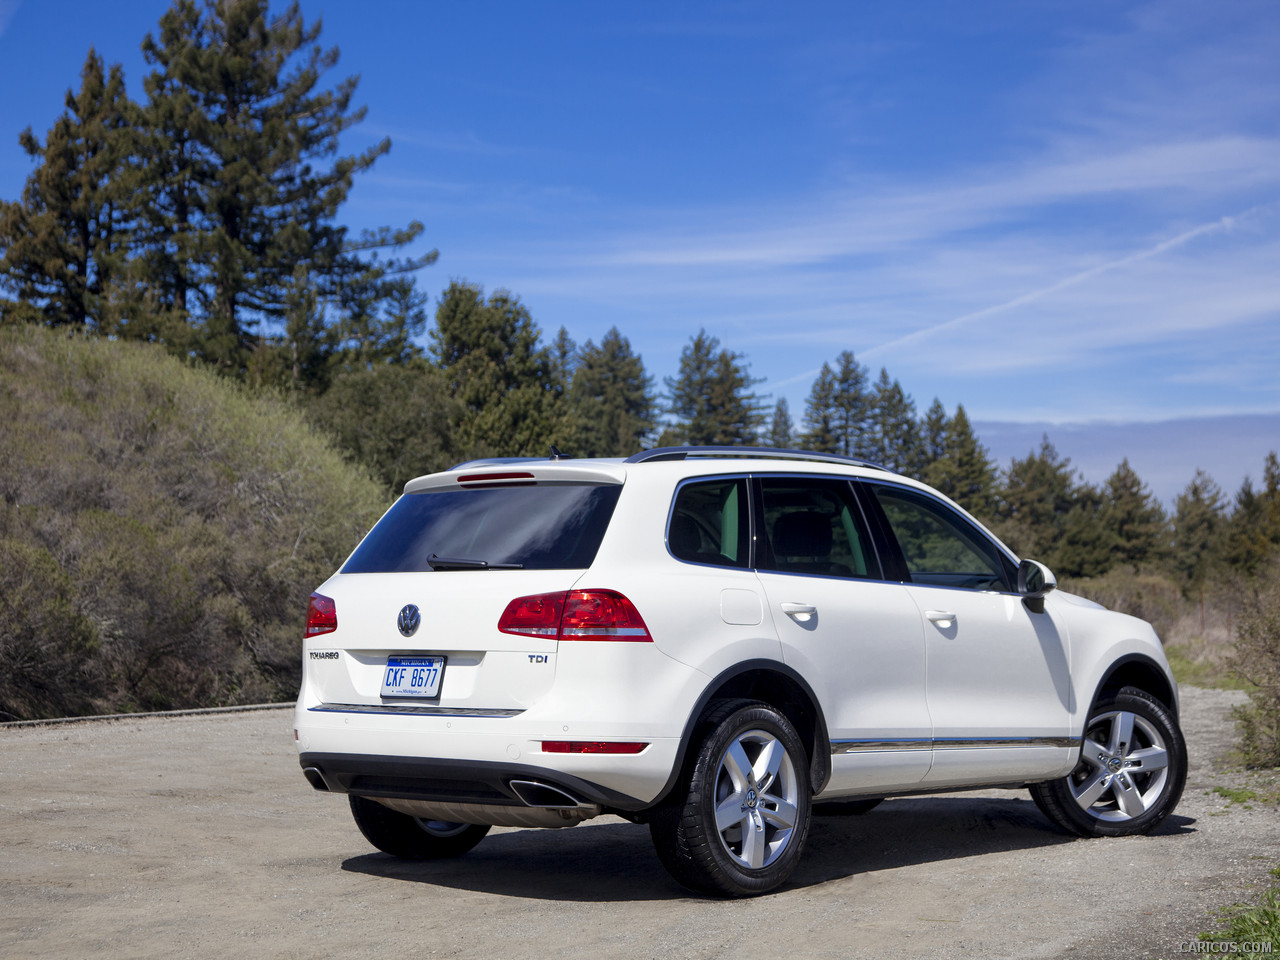 2014 Volkswagen Touareg Side Rear Angle